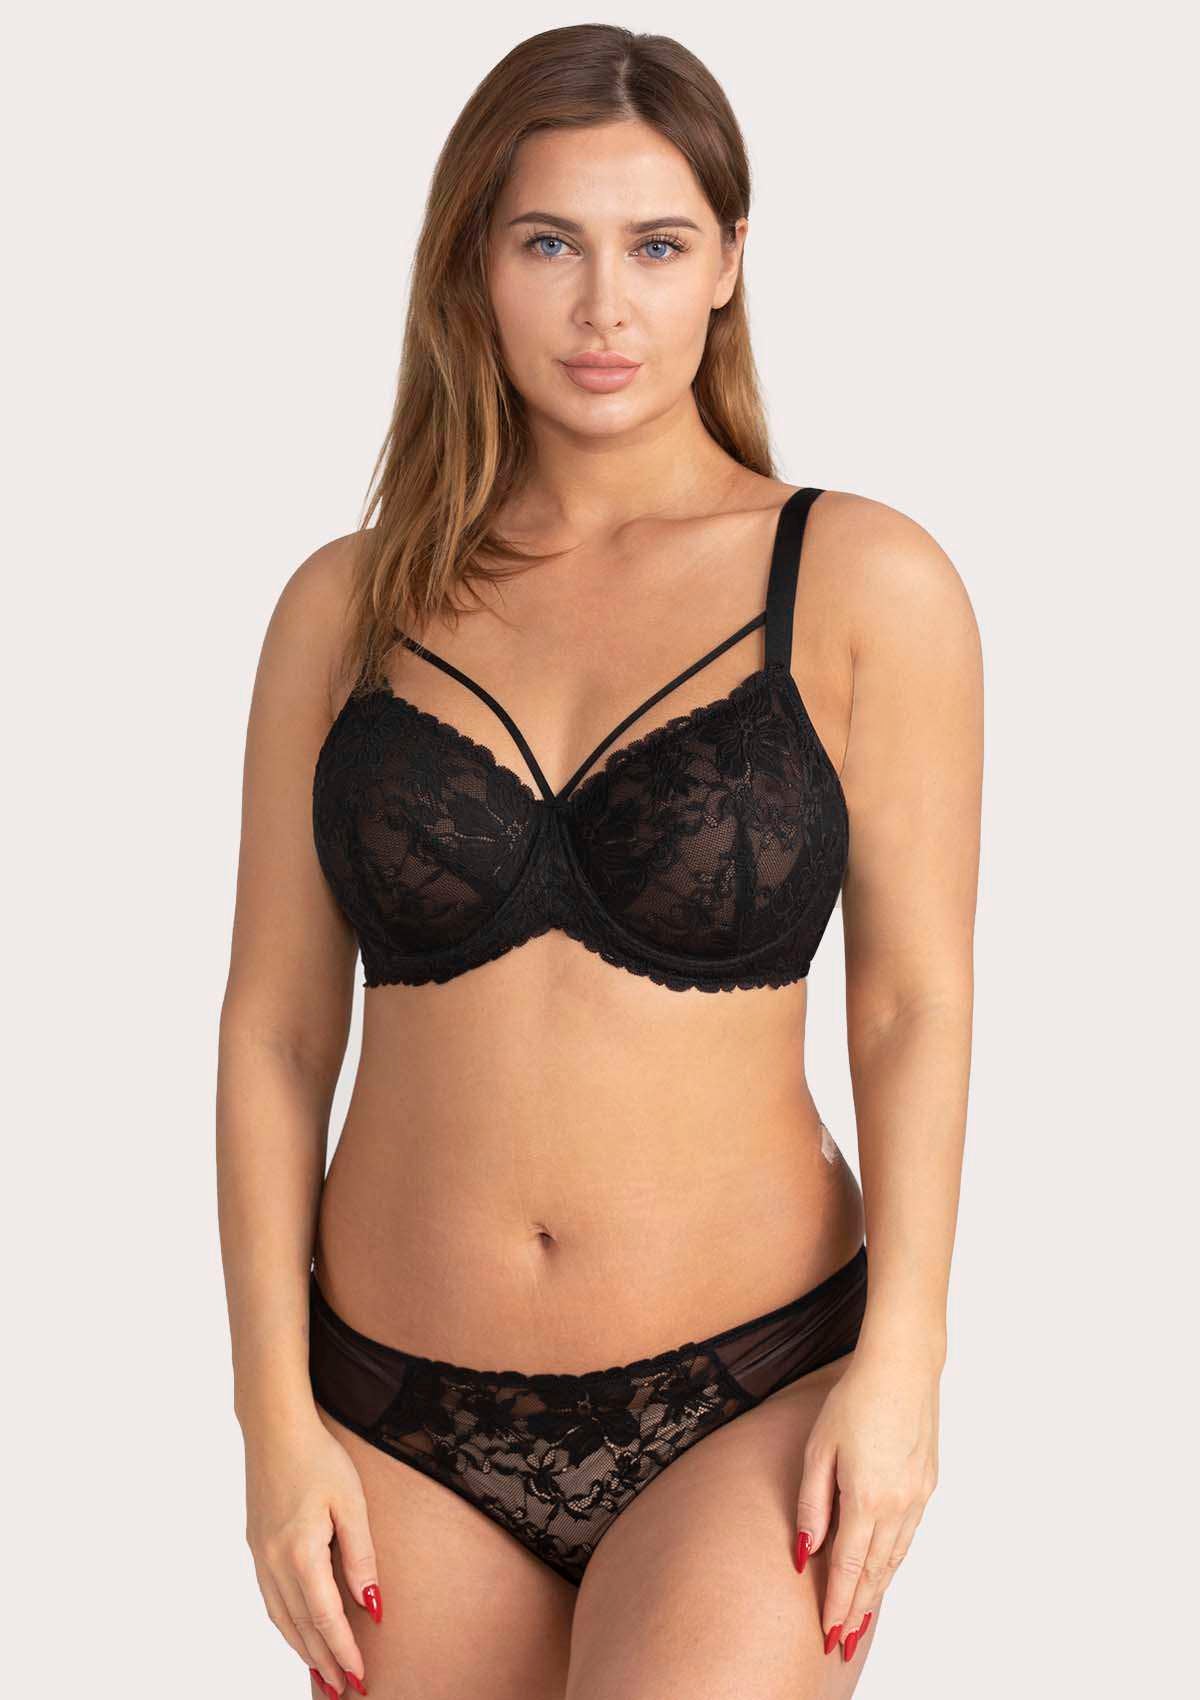 HSIA Pretty In Petals Lace Bra And Panty Set: Non Padded Wired Bra - Black / 38 / DDD/F